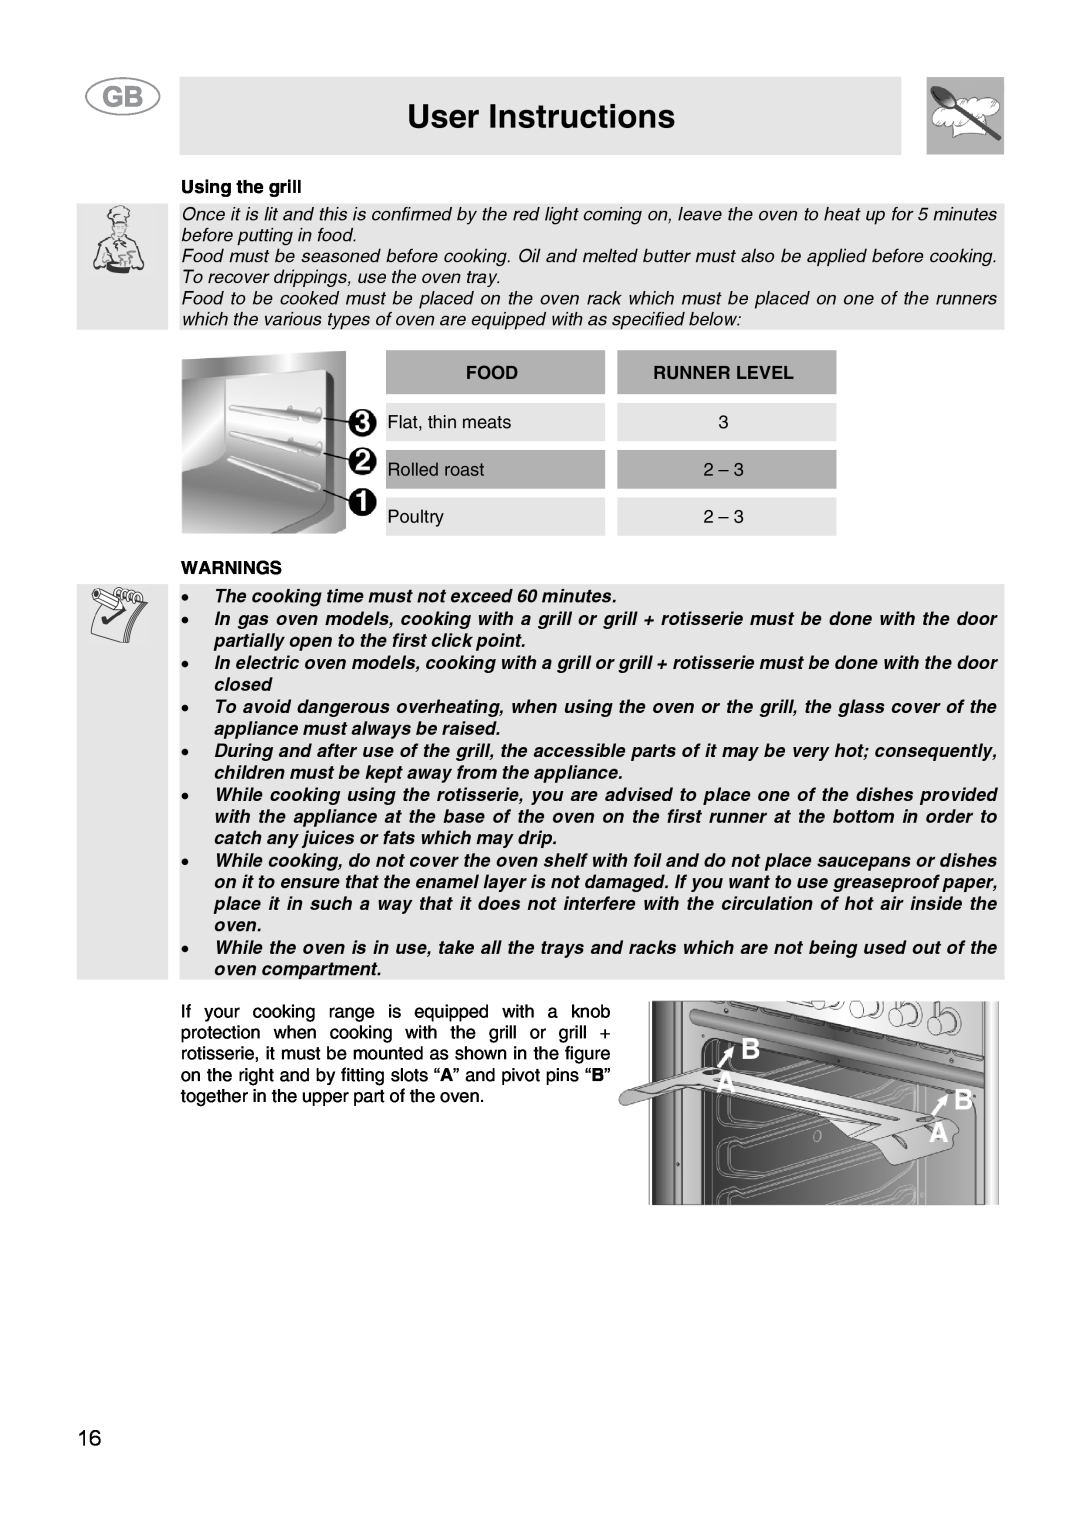 Smeg CS15-5 manual User Instructions, The cooking time must not exceed 60 minutes 